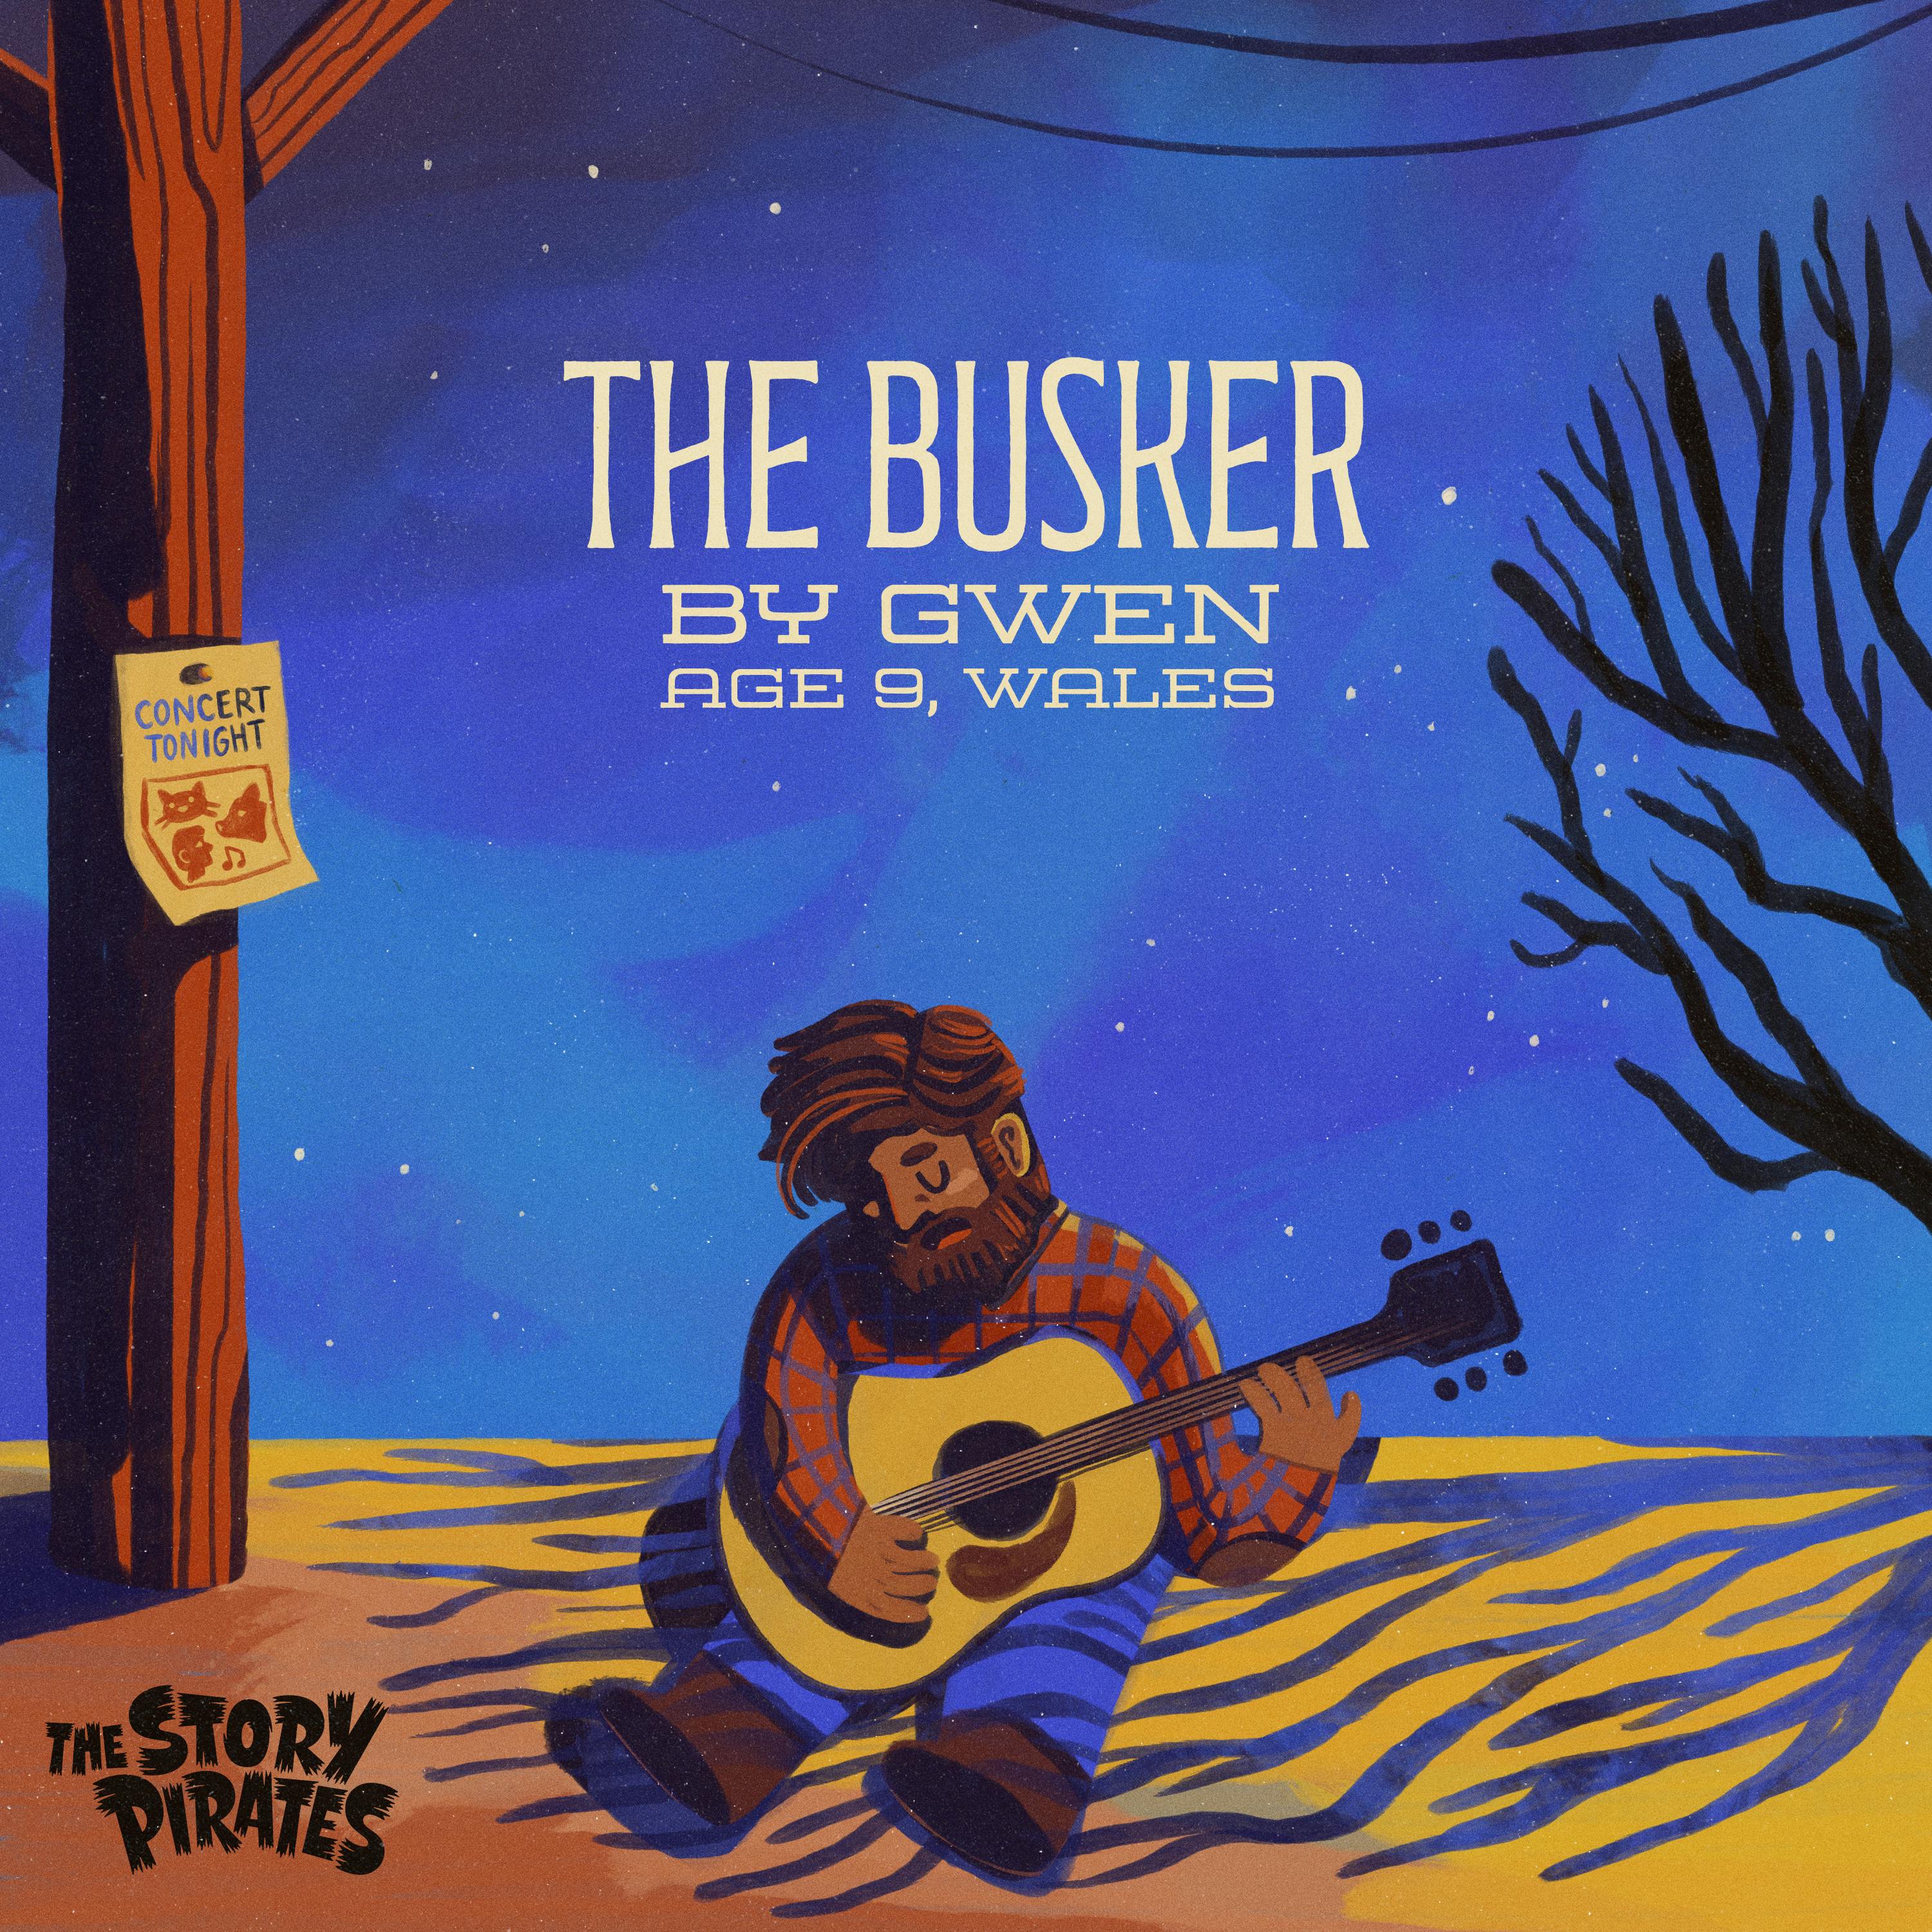 The Busker/The Time I Was An Hour Late To School 2 (feat. Greg Hildreth)